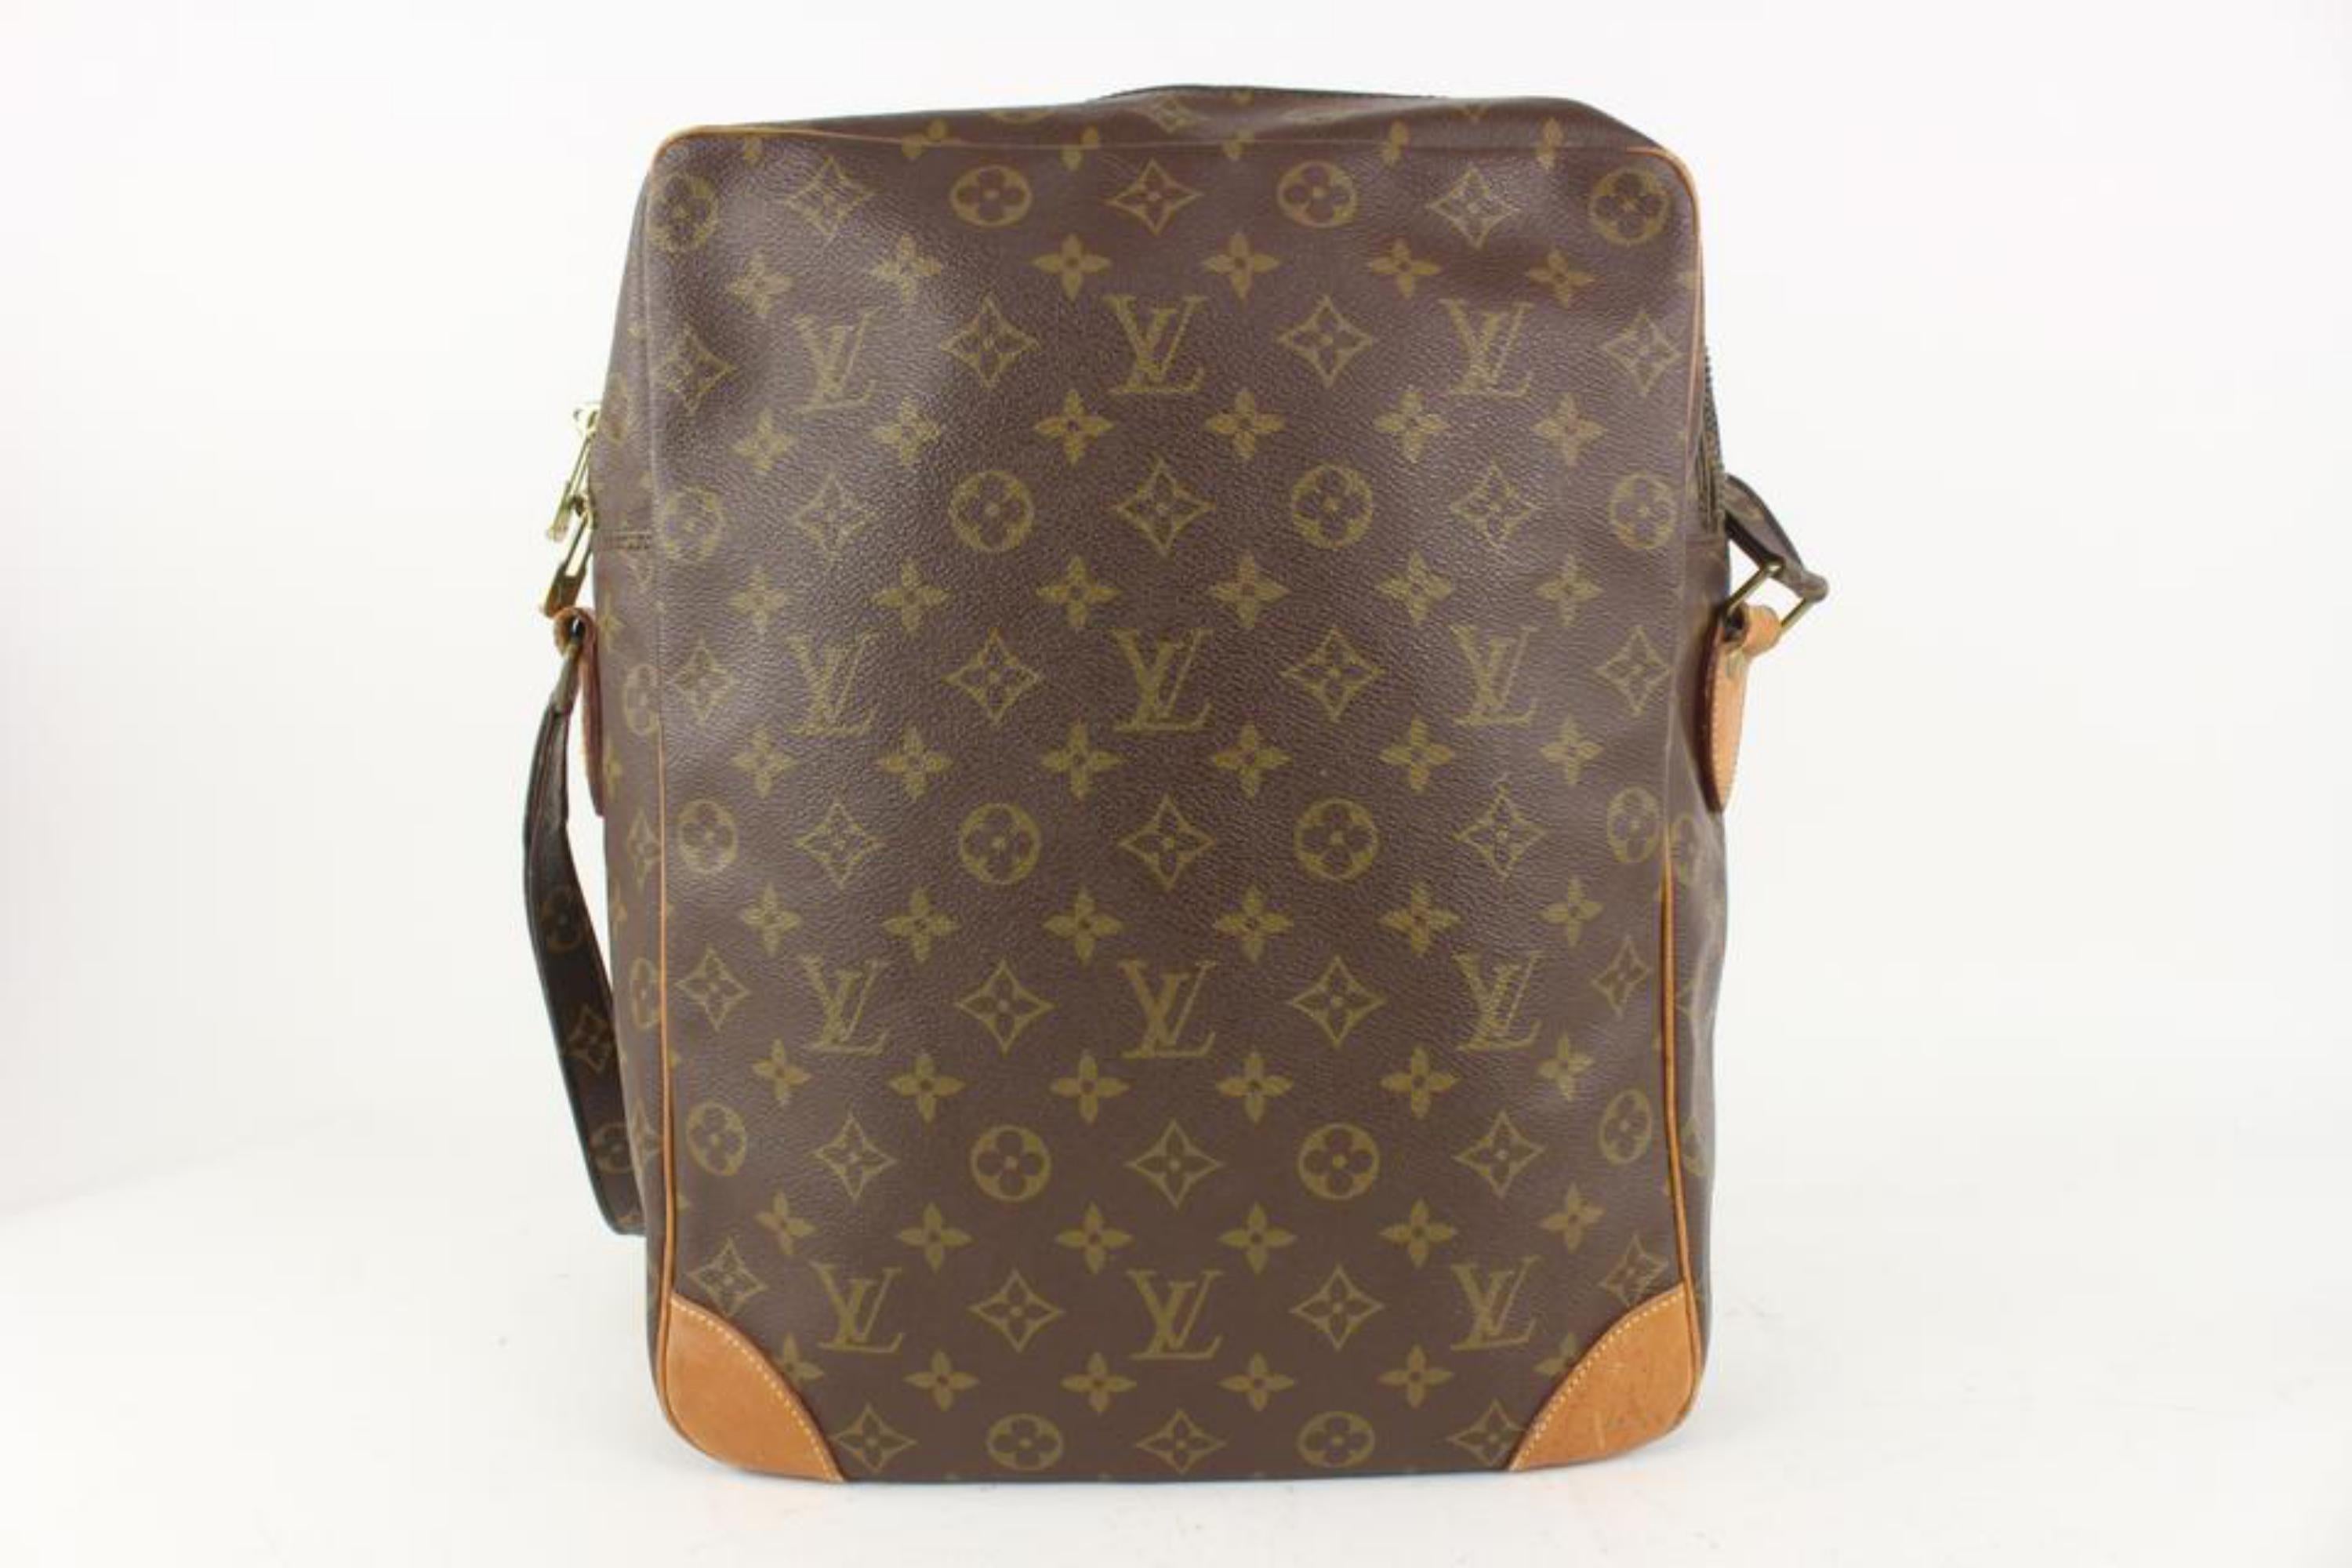 Louis Vuitton XL Monogram Danube GM Shoulder Bag 1LV88a In Good Condition For Sale In Dix hills, NY